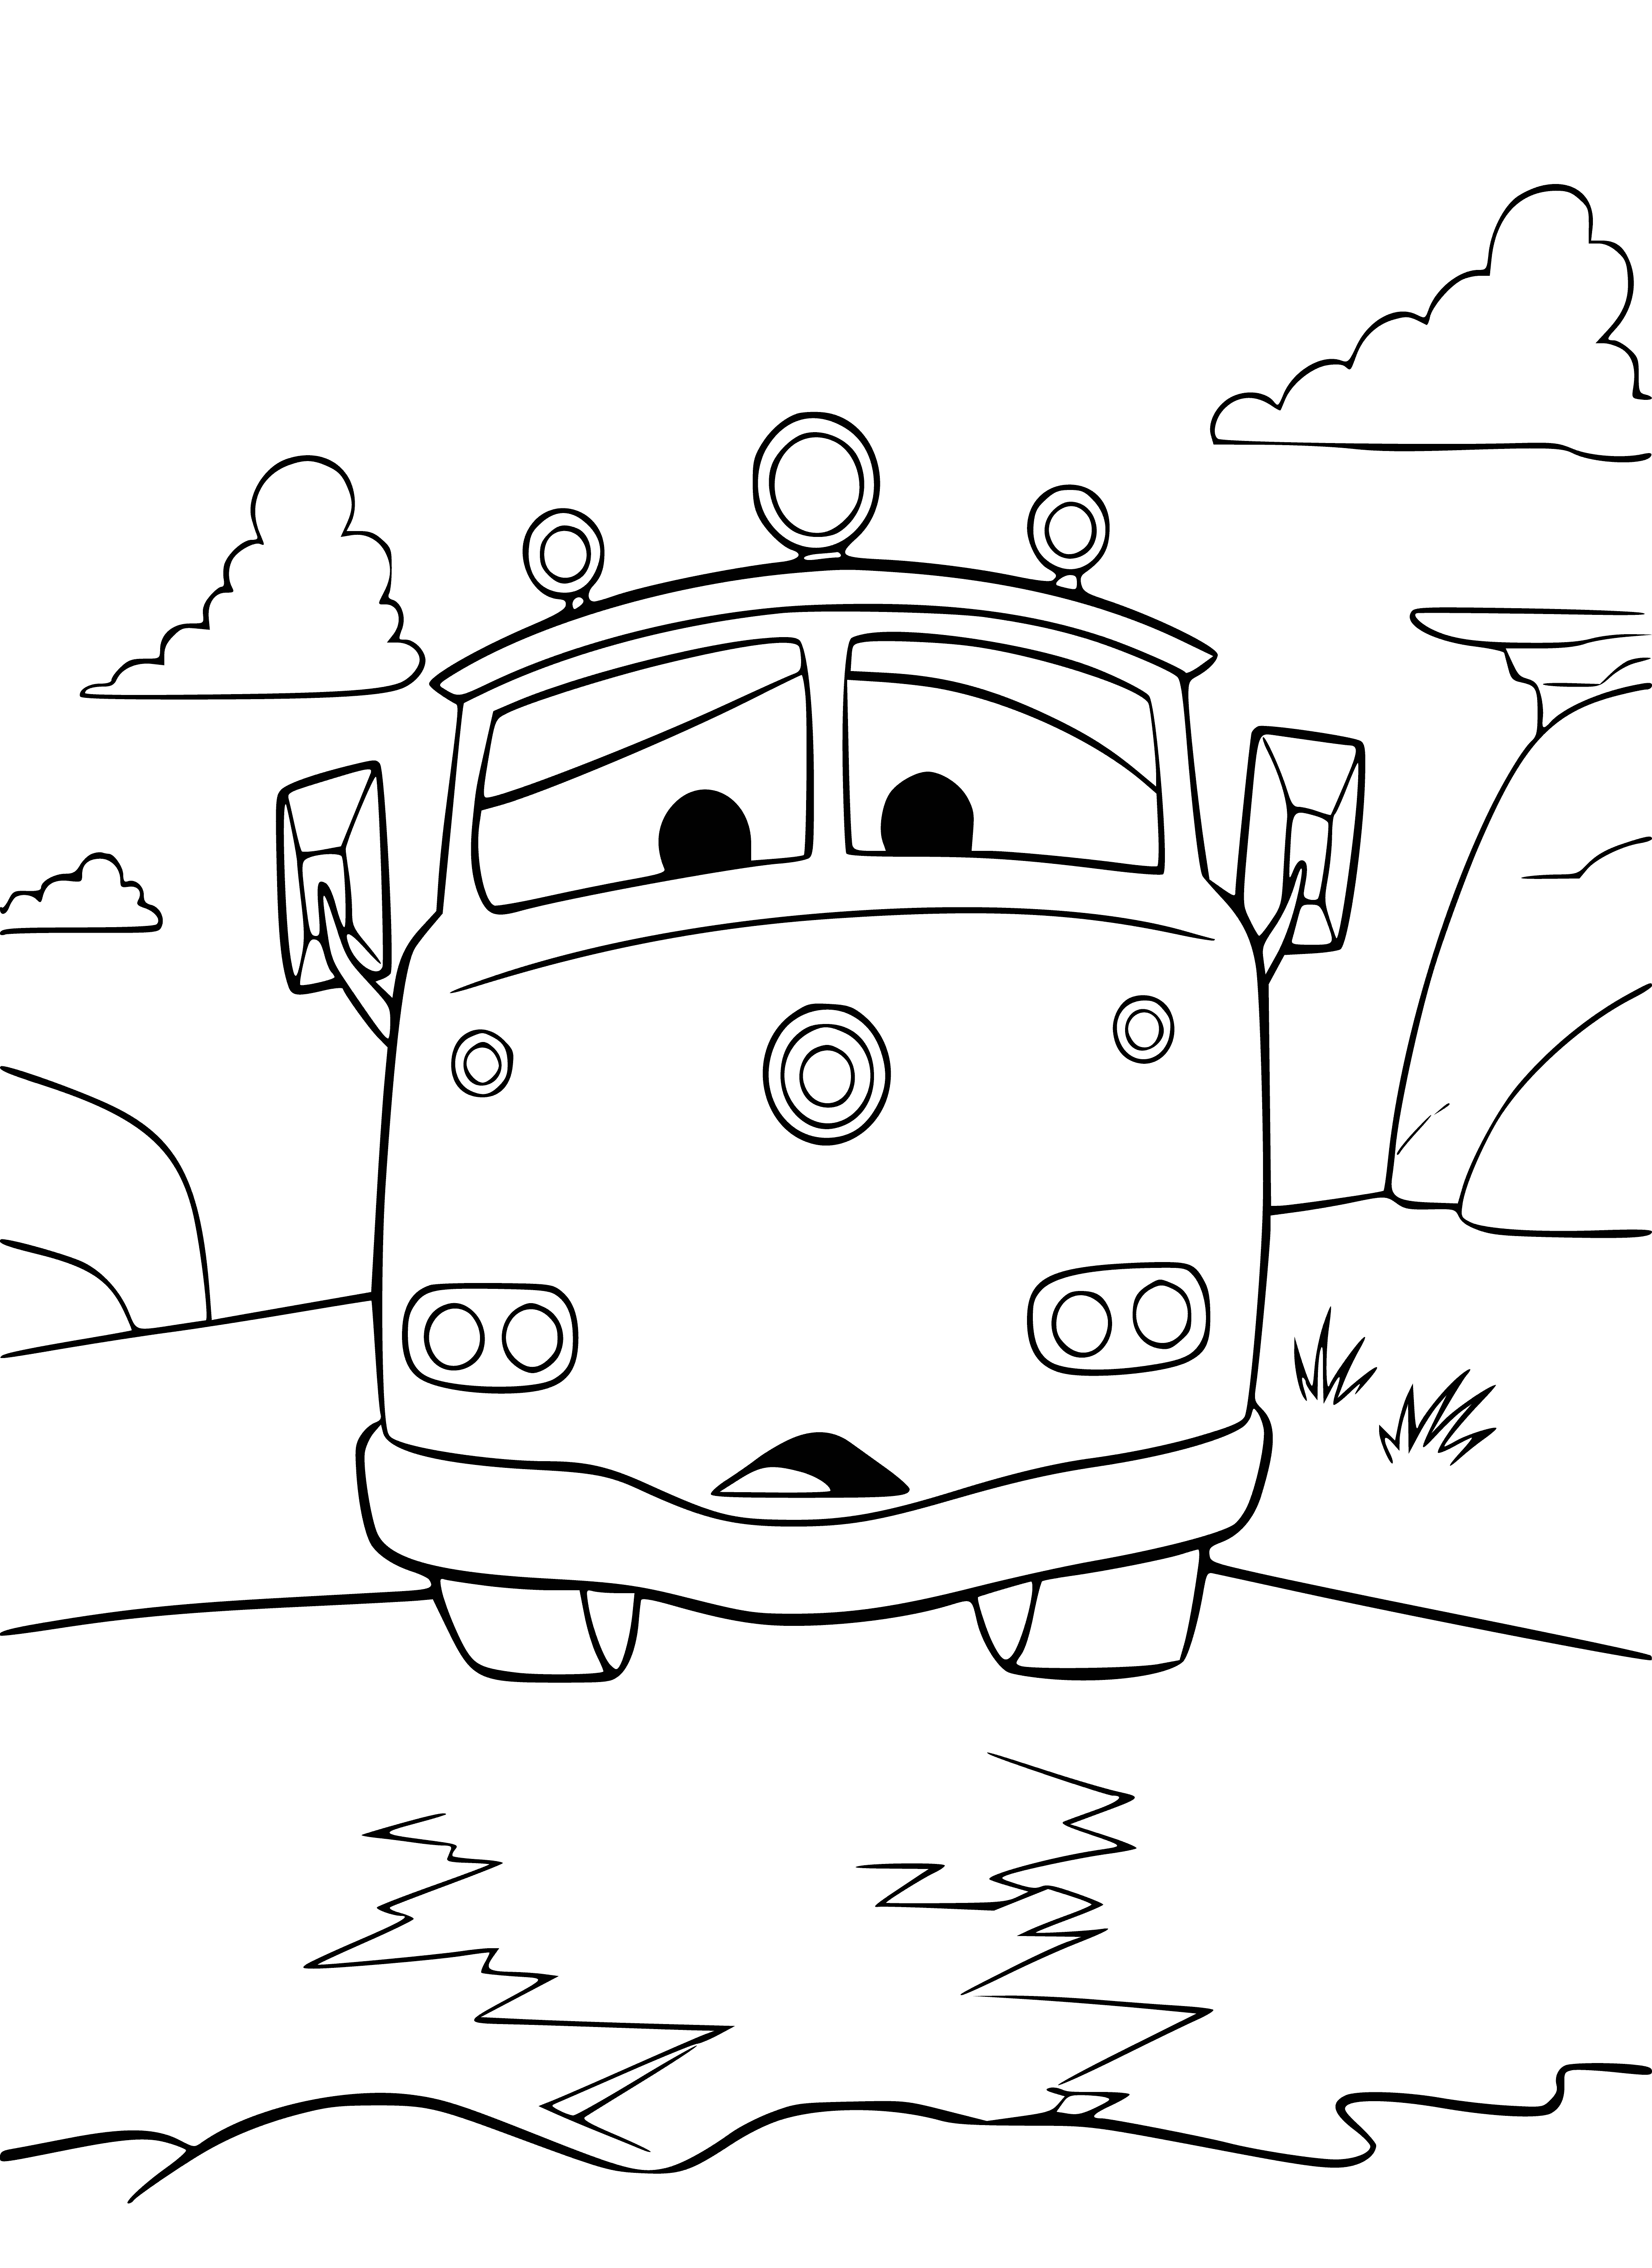 coloring page: A fire truck drives through a city, wide-eyed and open-mouthed, sorrowfully wailing. #citylife #firetruck